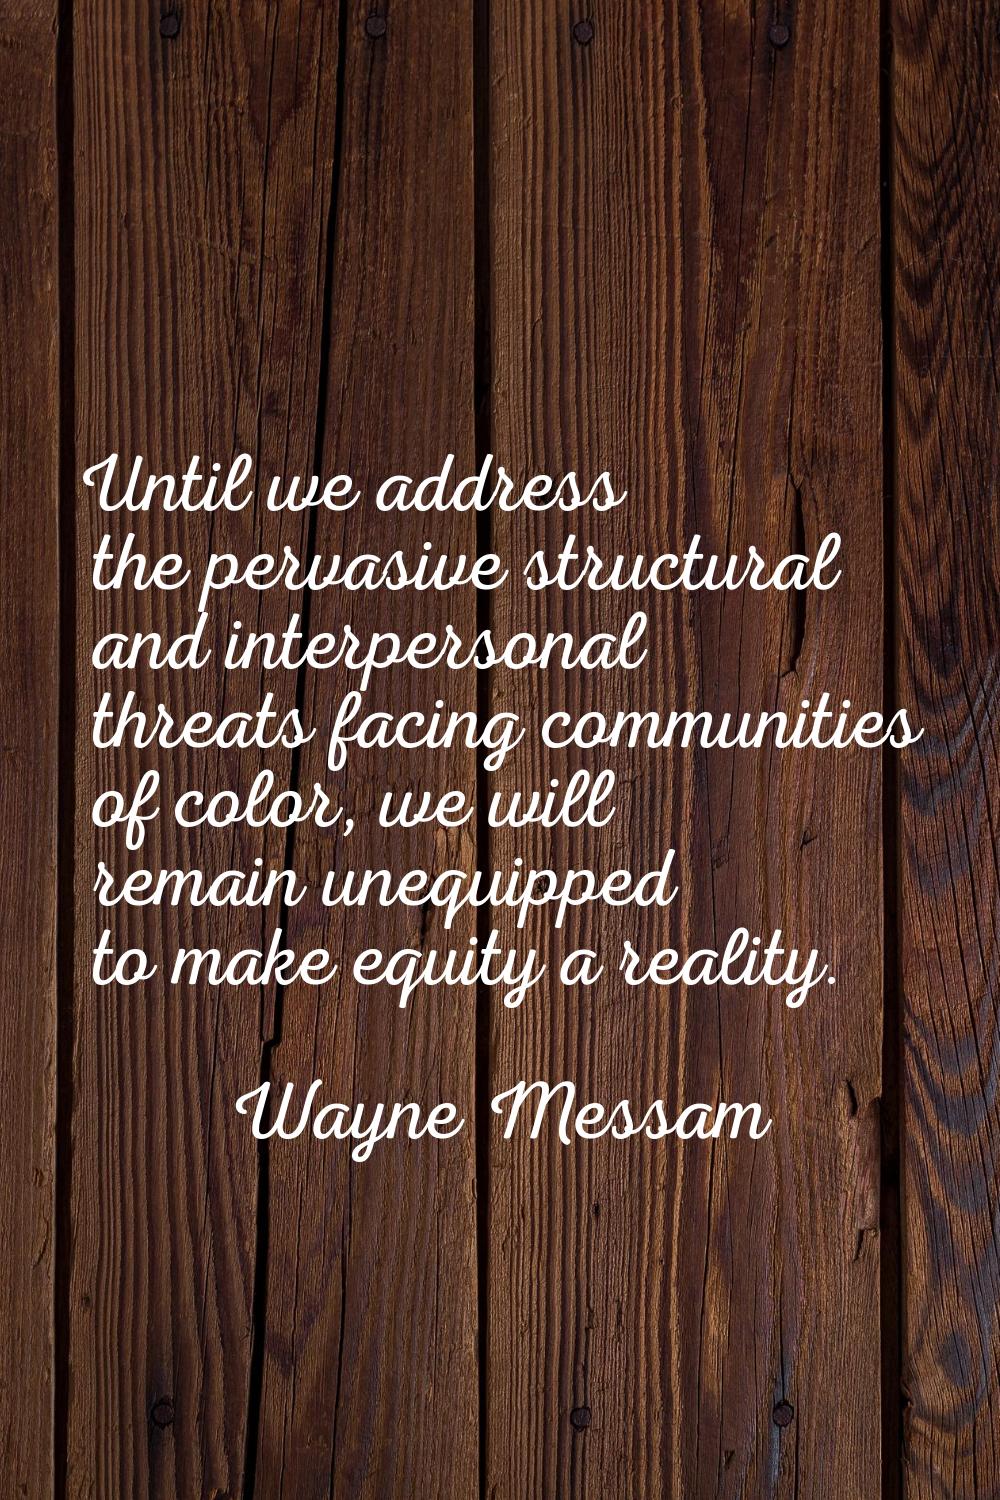 Until we address the pervasive structural and interpersonal threats facing communities of color, we